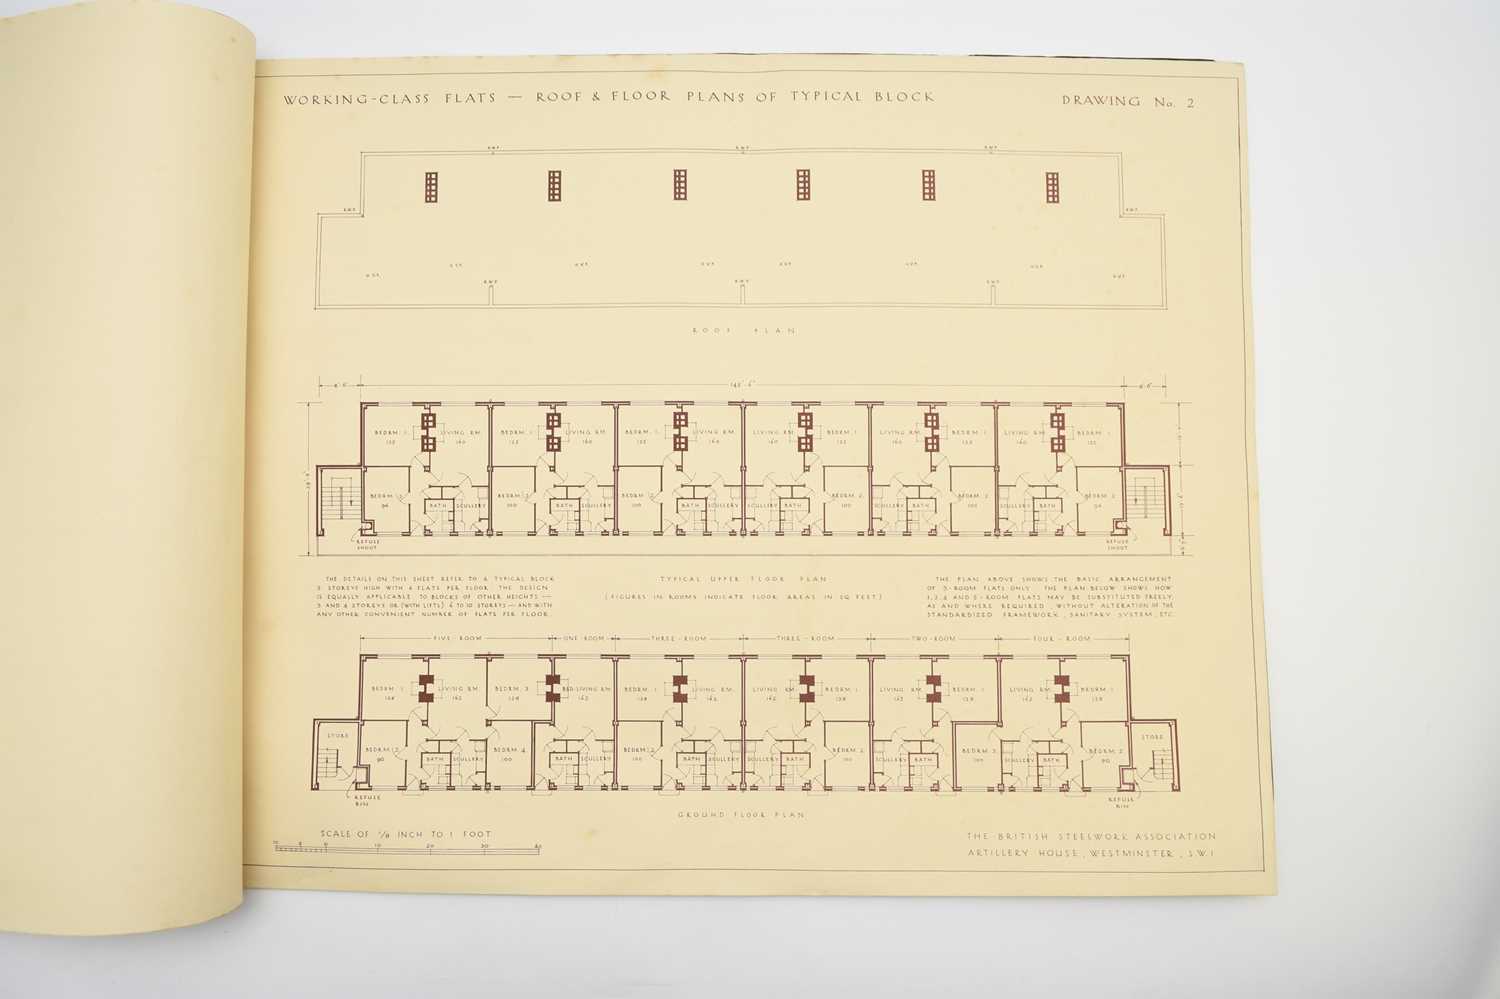 WORKING CLASS FLATS. Specification and working drawings. British Steelwork Association c1960 - Image 2 of 3